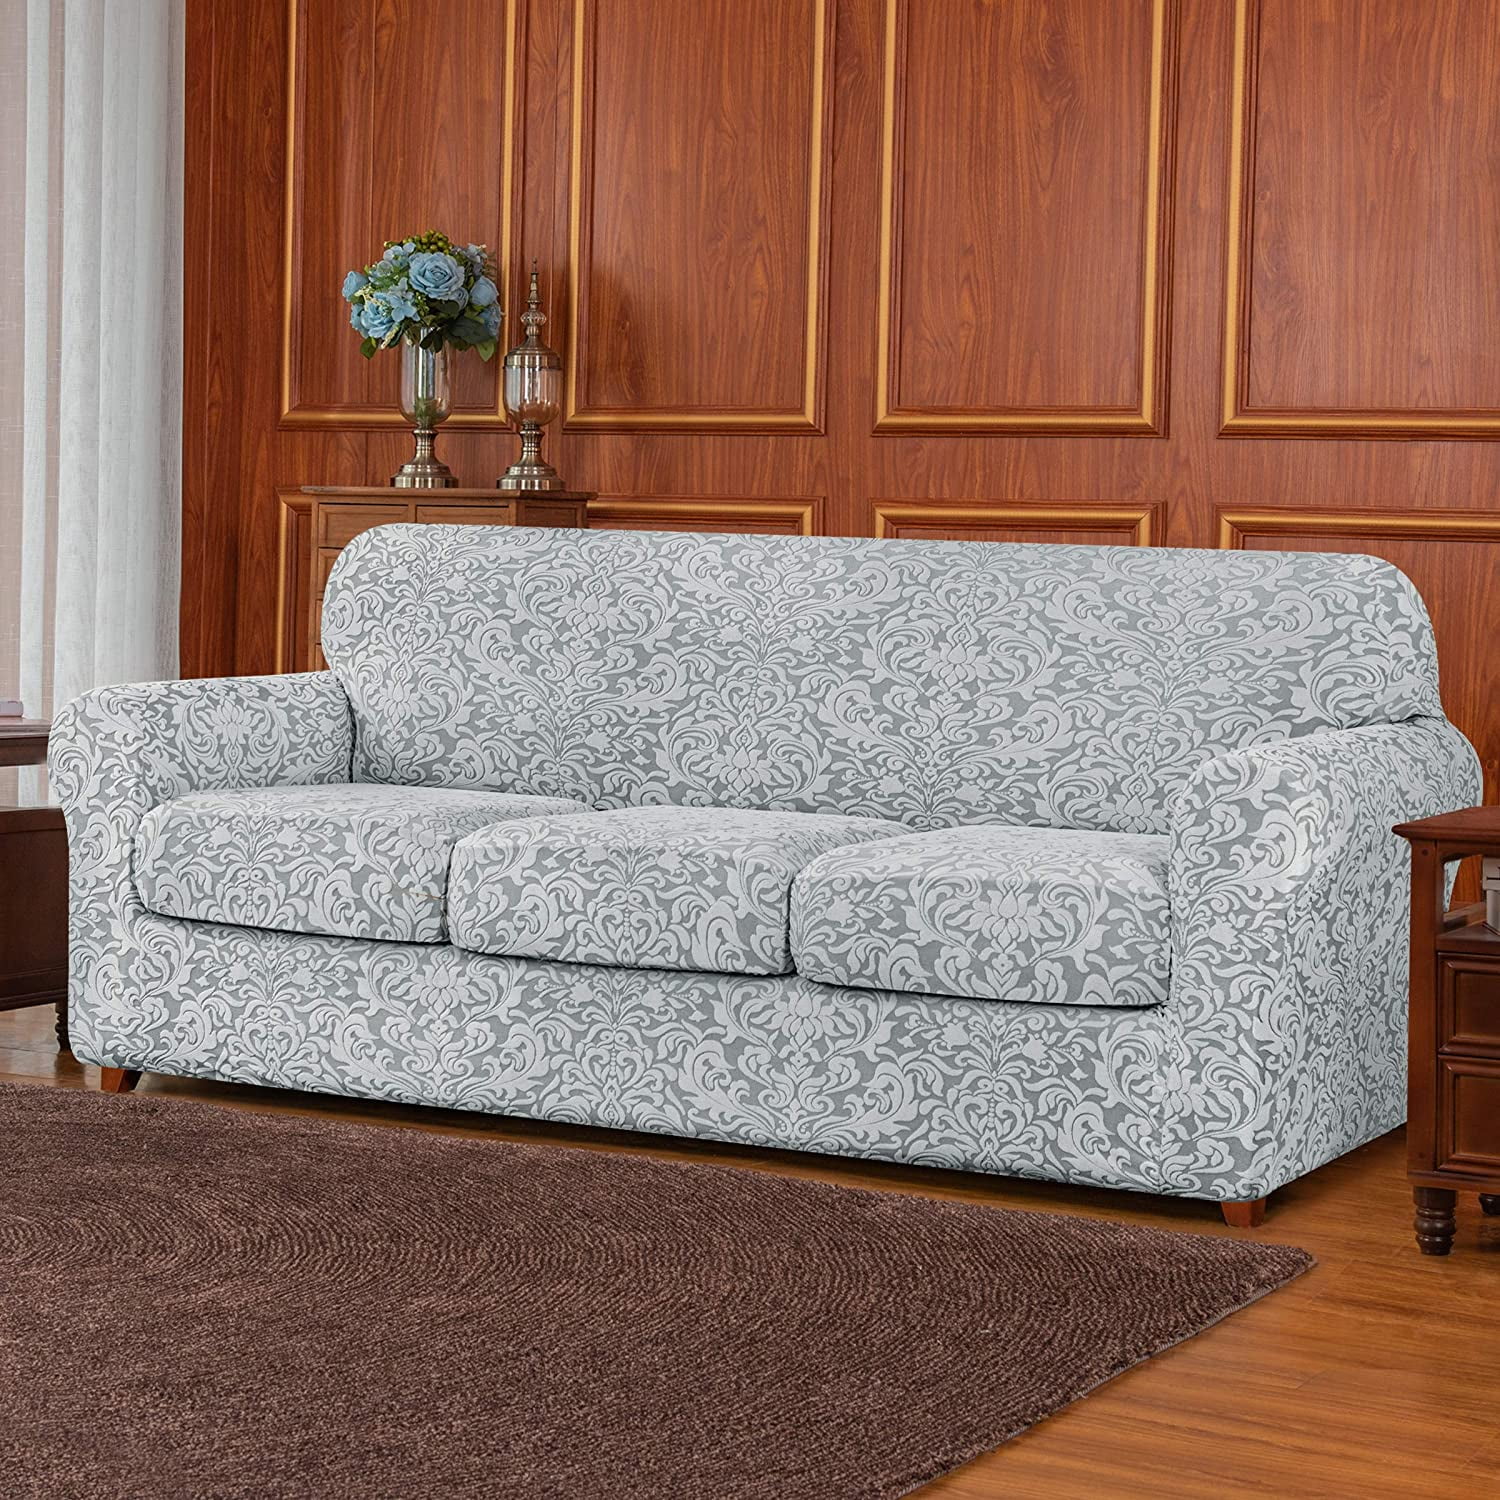 subrtex Jacquard Damask Sofa Slipcover with 3 Separate Seat Cushion Couch Cover Stretch Washable